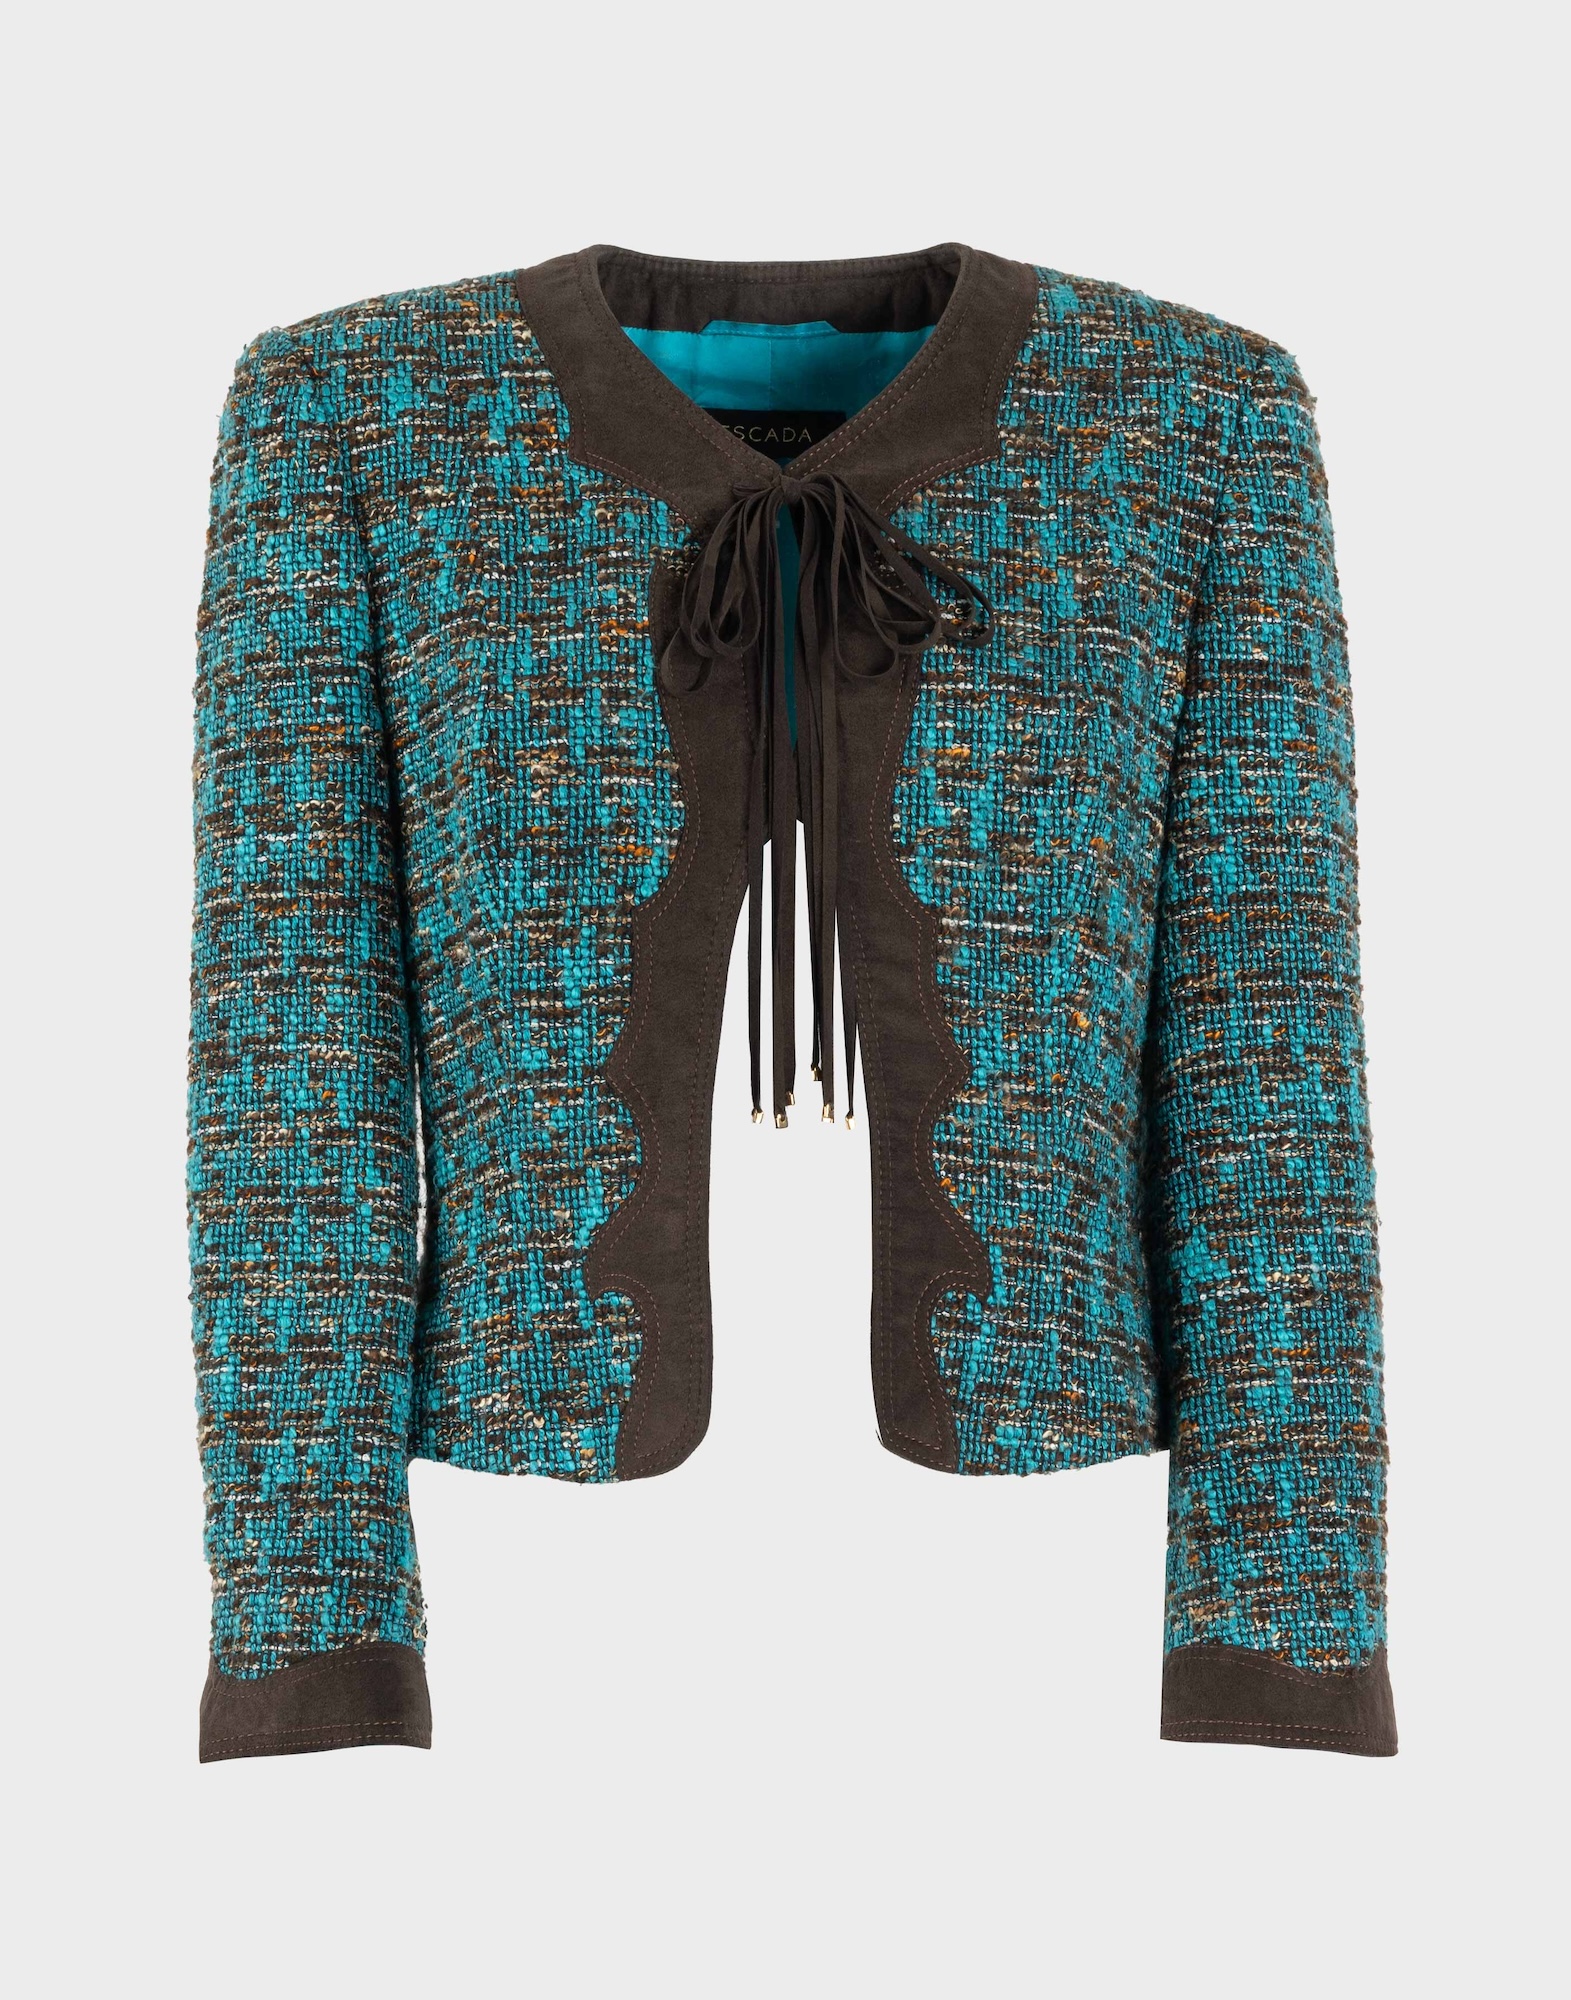 green and brown ladies' blazer in tweed-type fabric with brown leather details and bow at collar